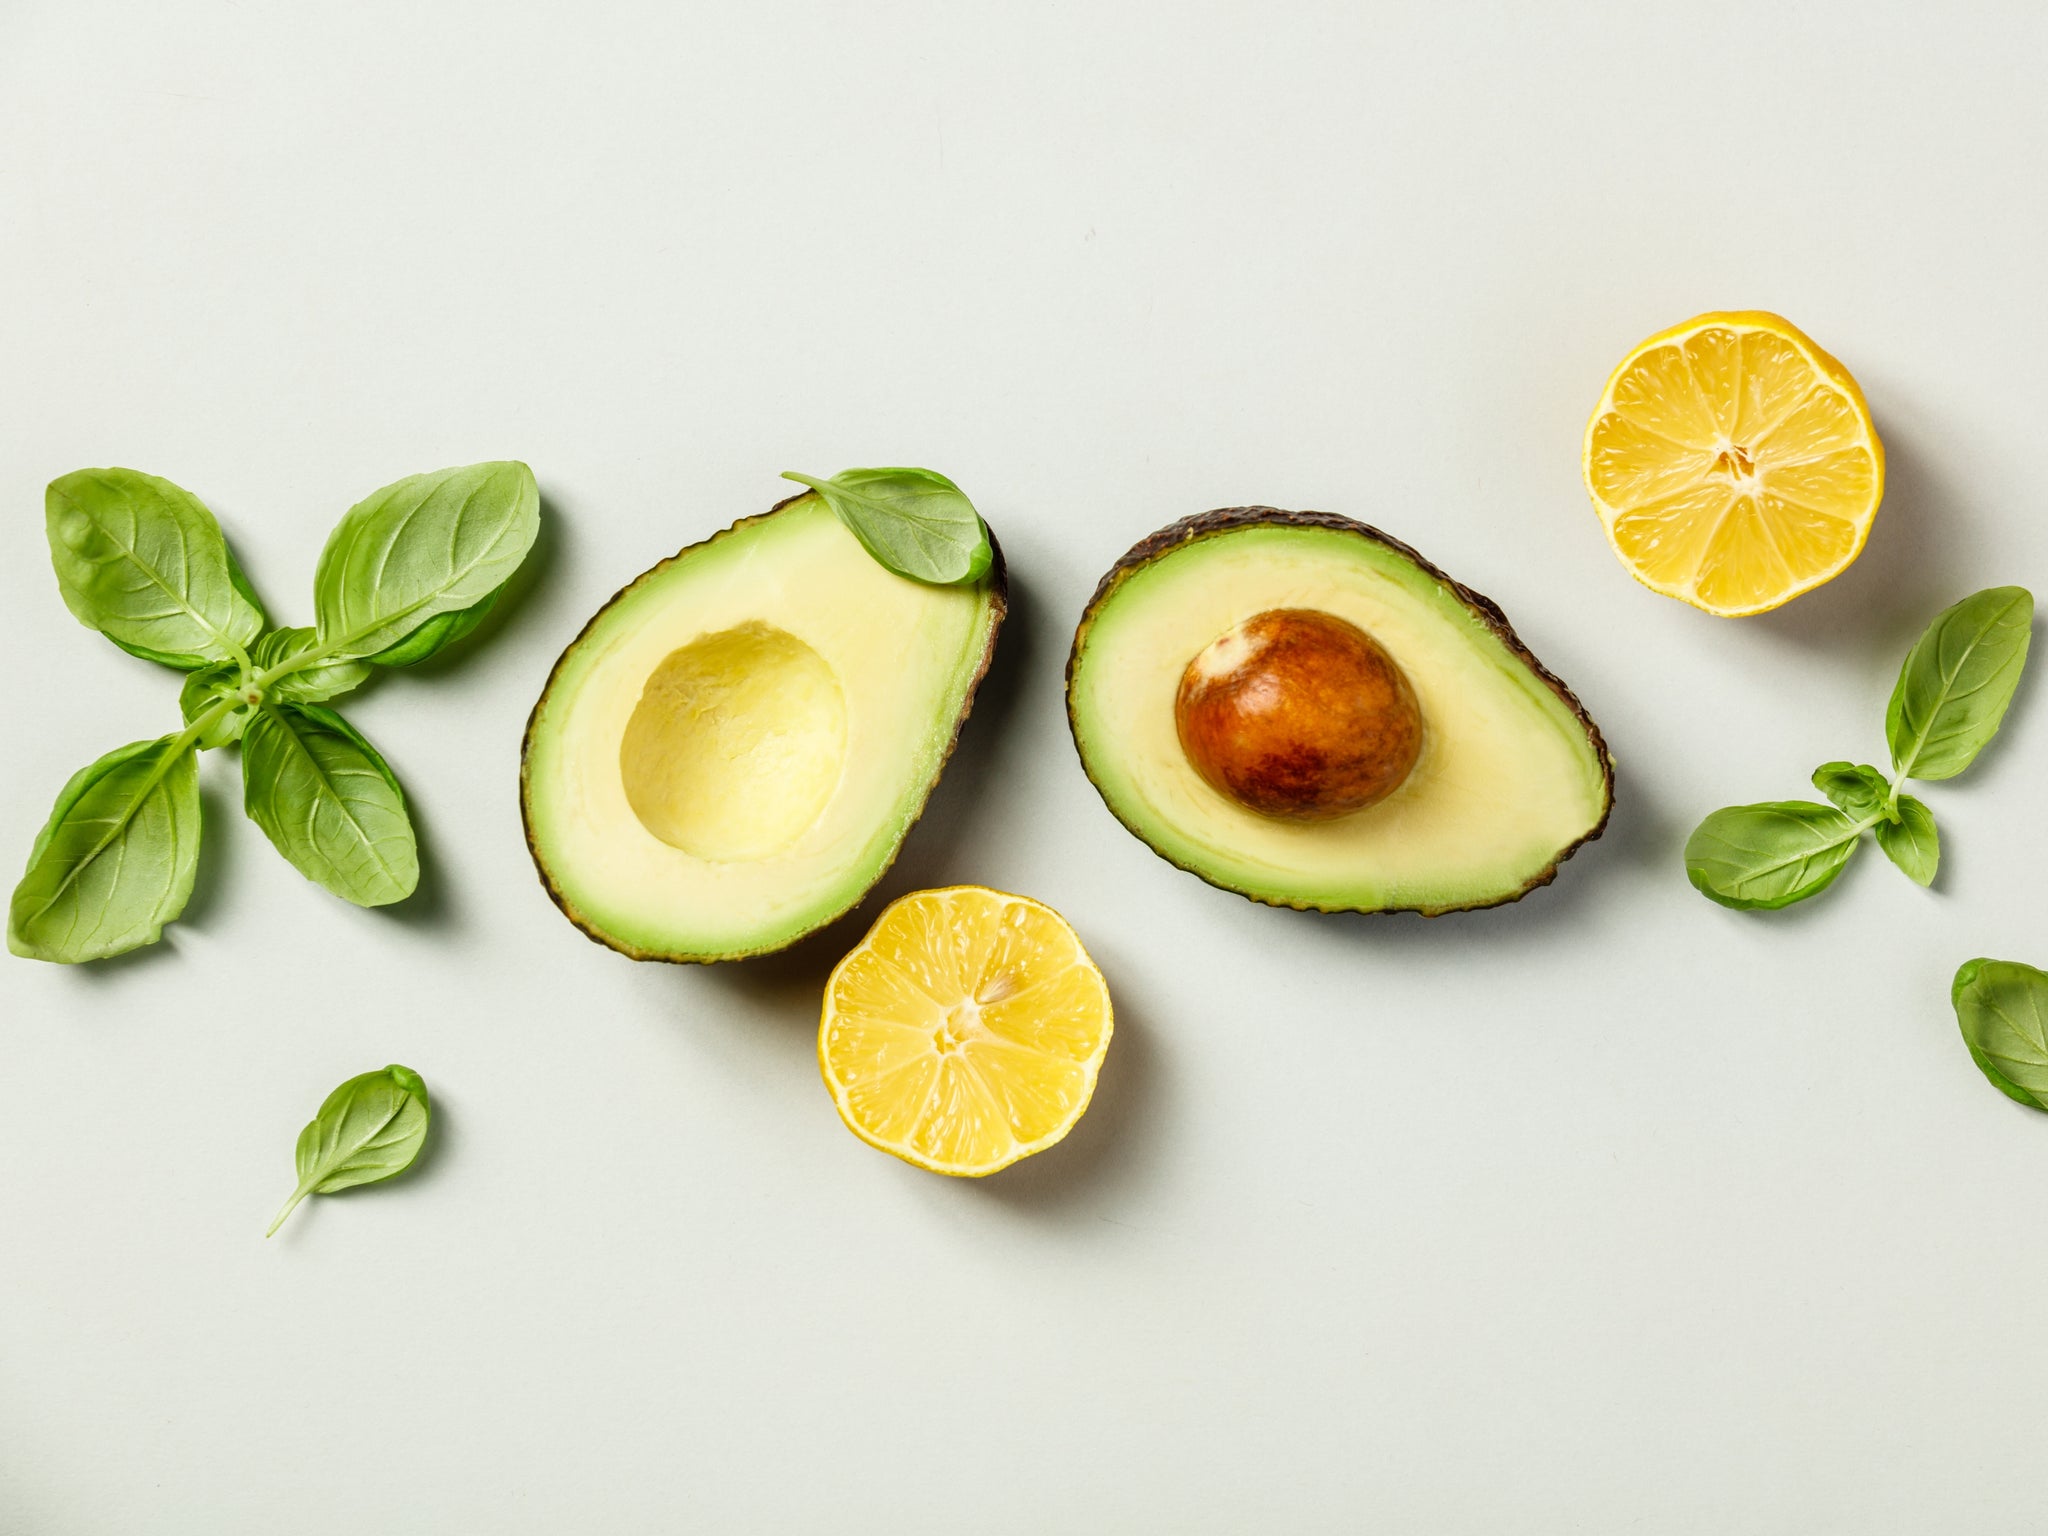 10 amazing facts about avocados